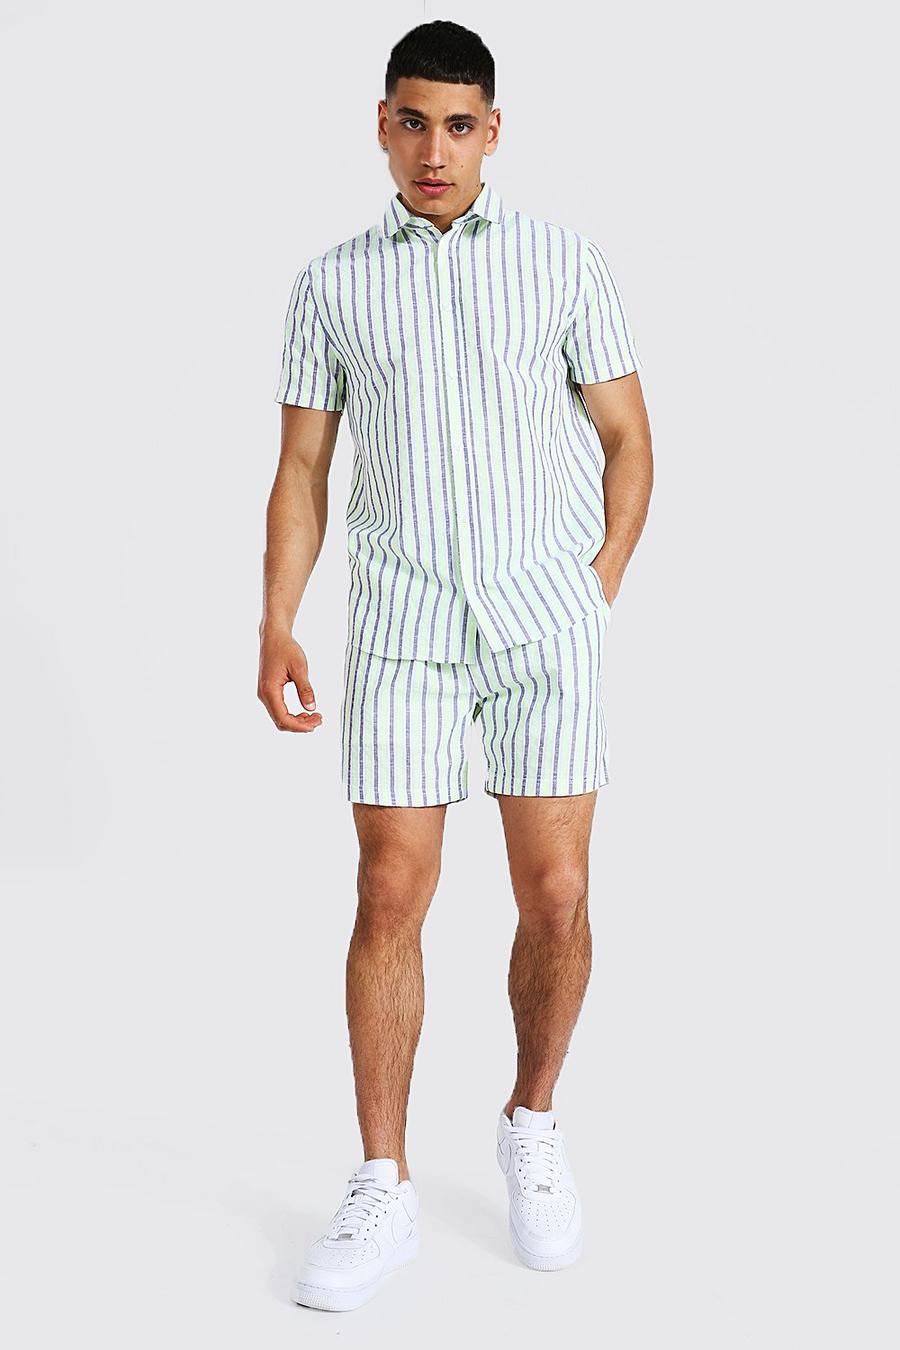 Yellow Neon Stripe Cotton Shirt And Shorts image number 1